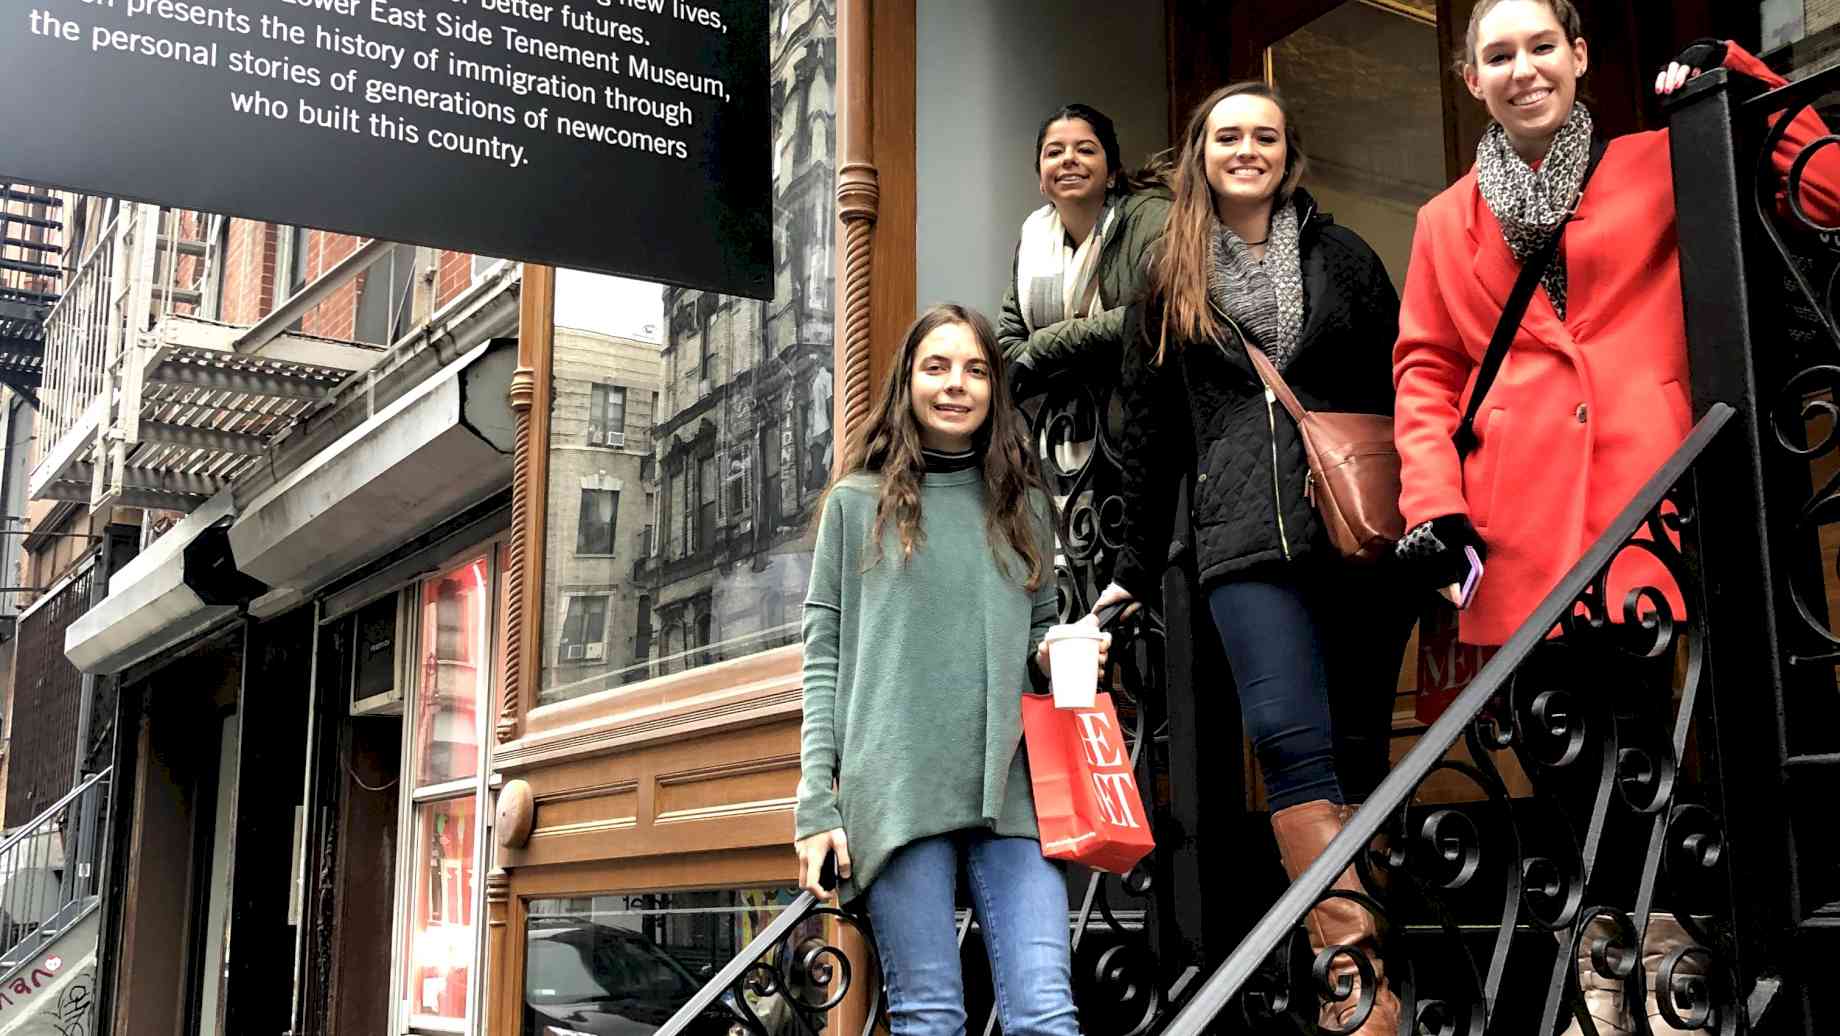 Museum Studies students on the stairs of the Tenement Museum in New York City. [Alt text: Four women pose on a wrought-iron staircase under a sign that reads “97 Orchard Street.”]